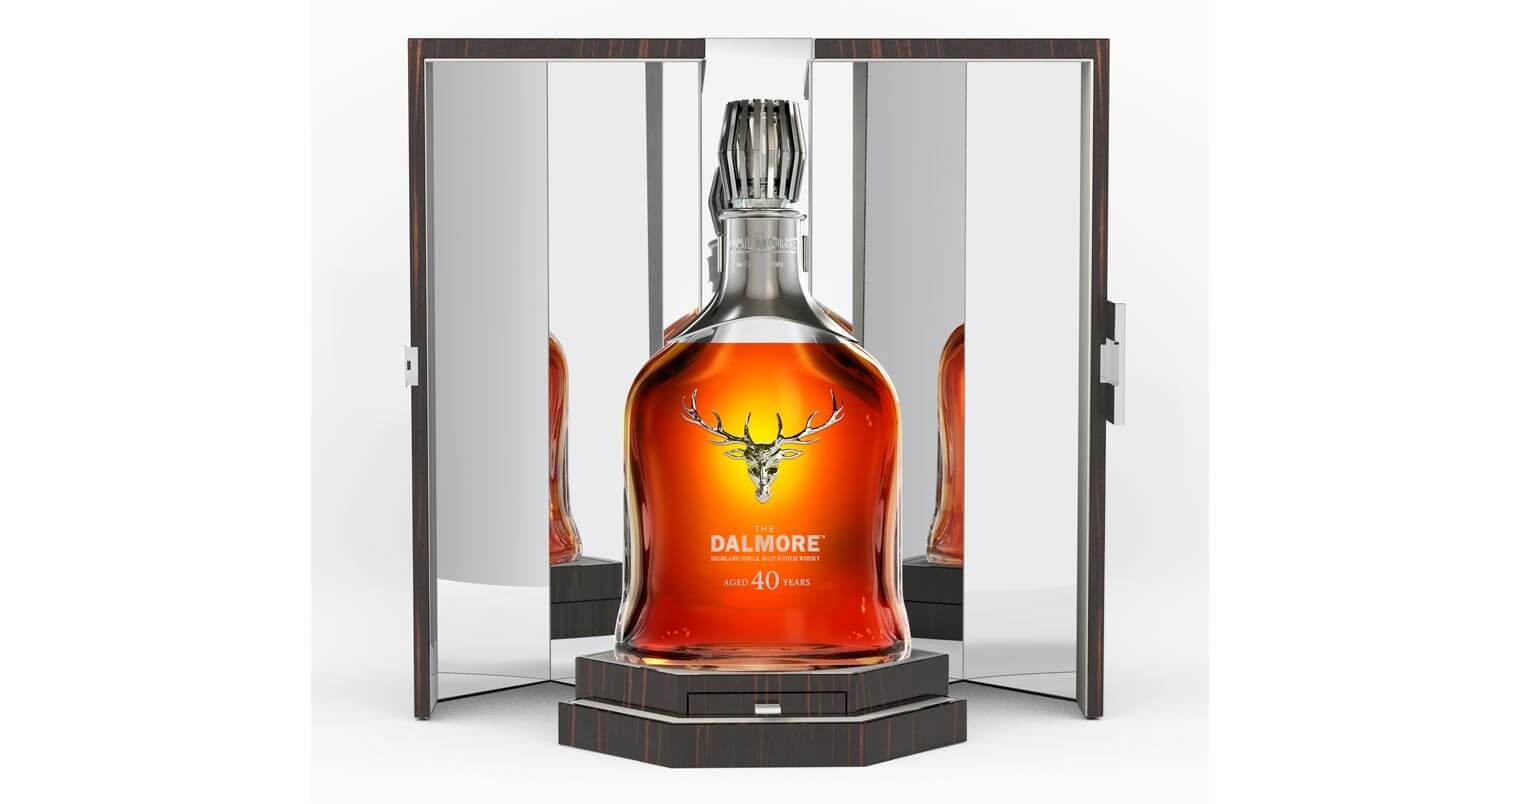 The Dalmore Releases 40 Year Old Whisky, featured image